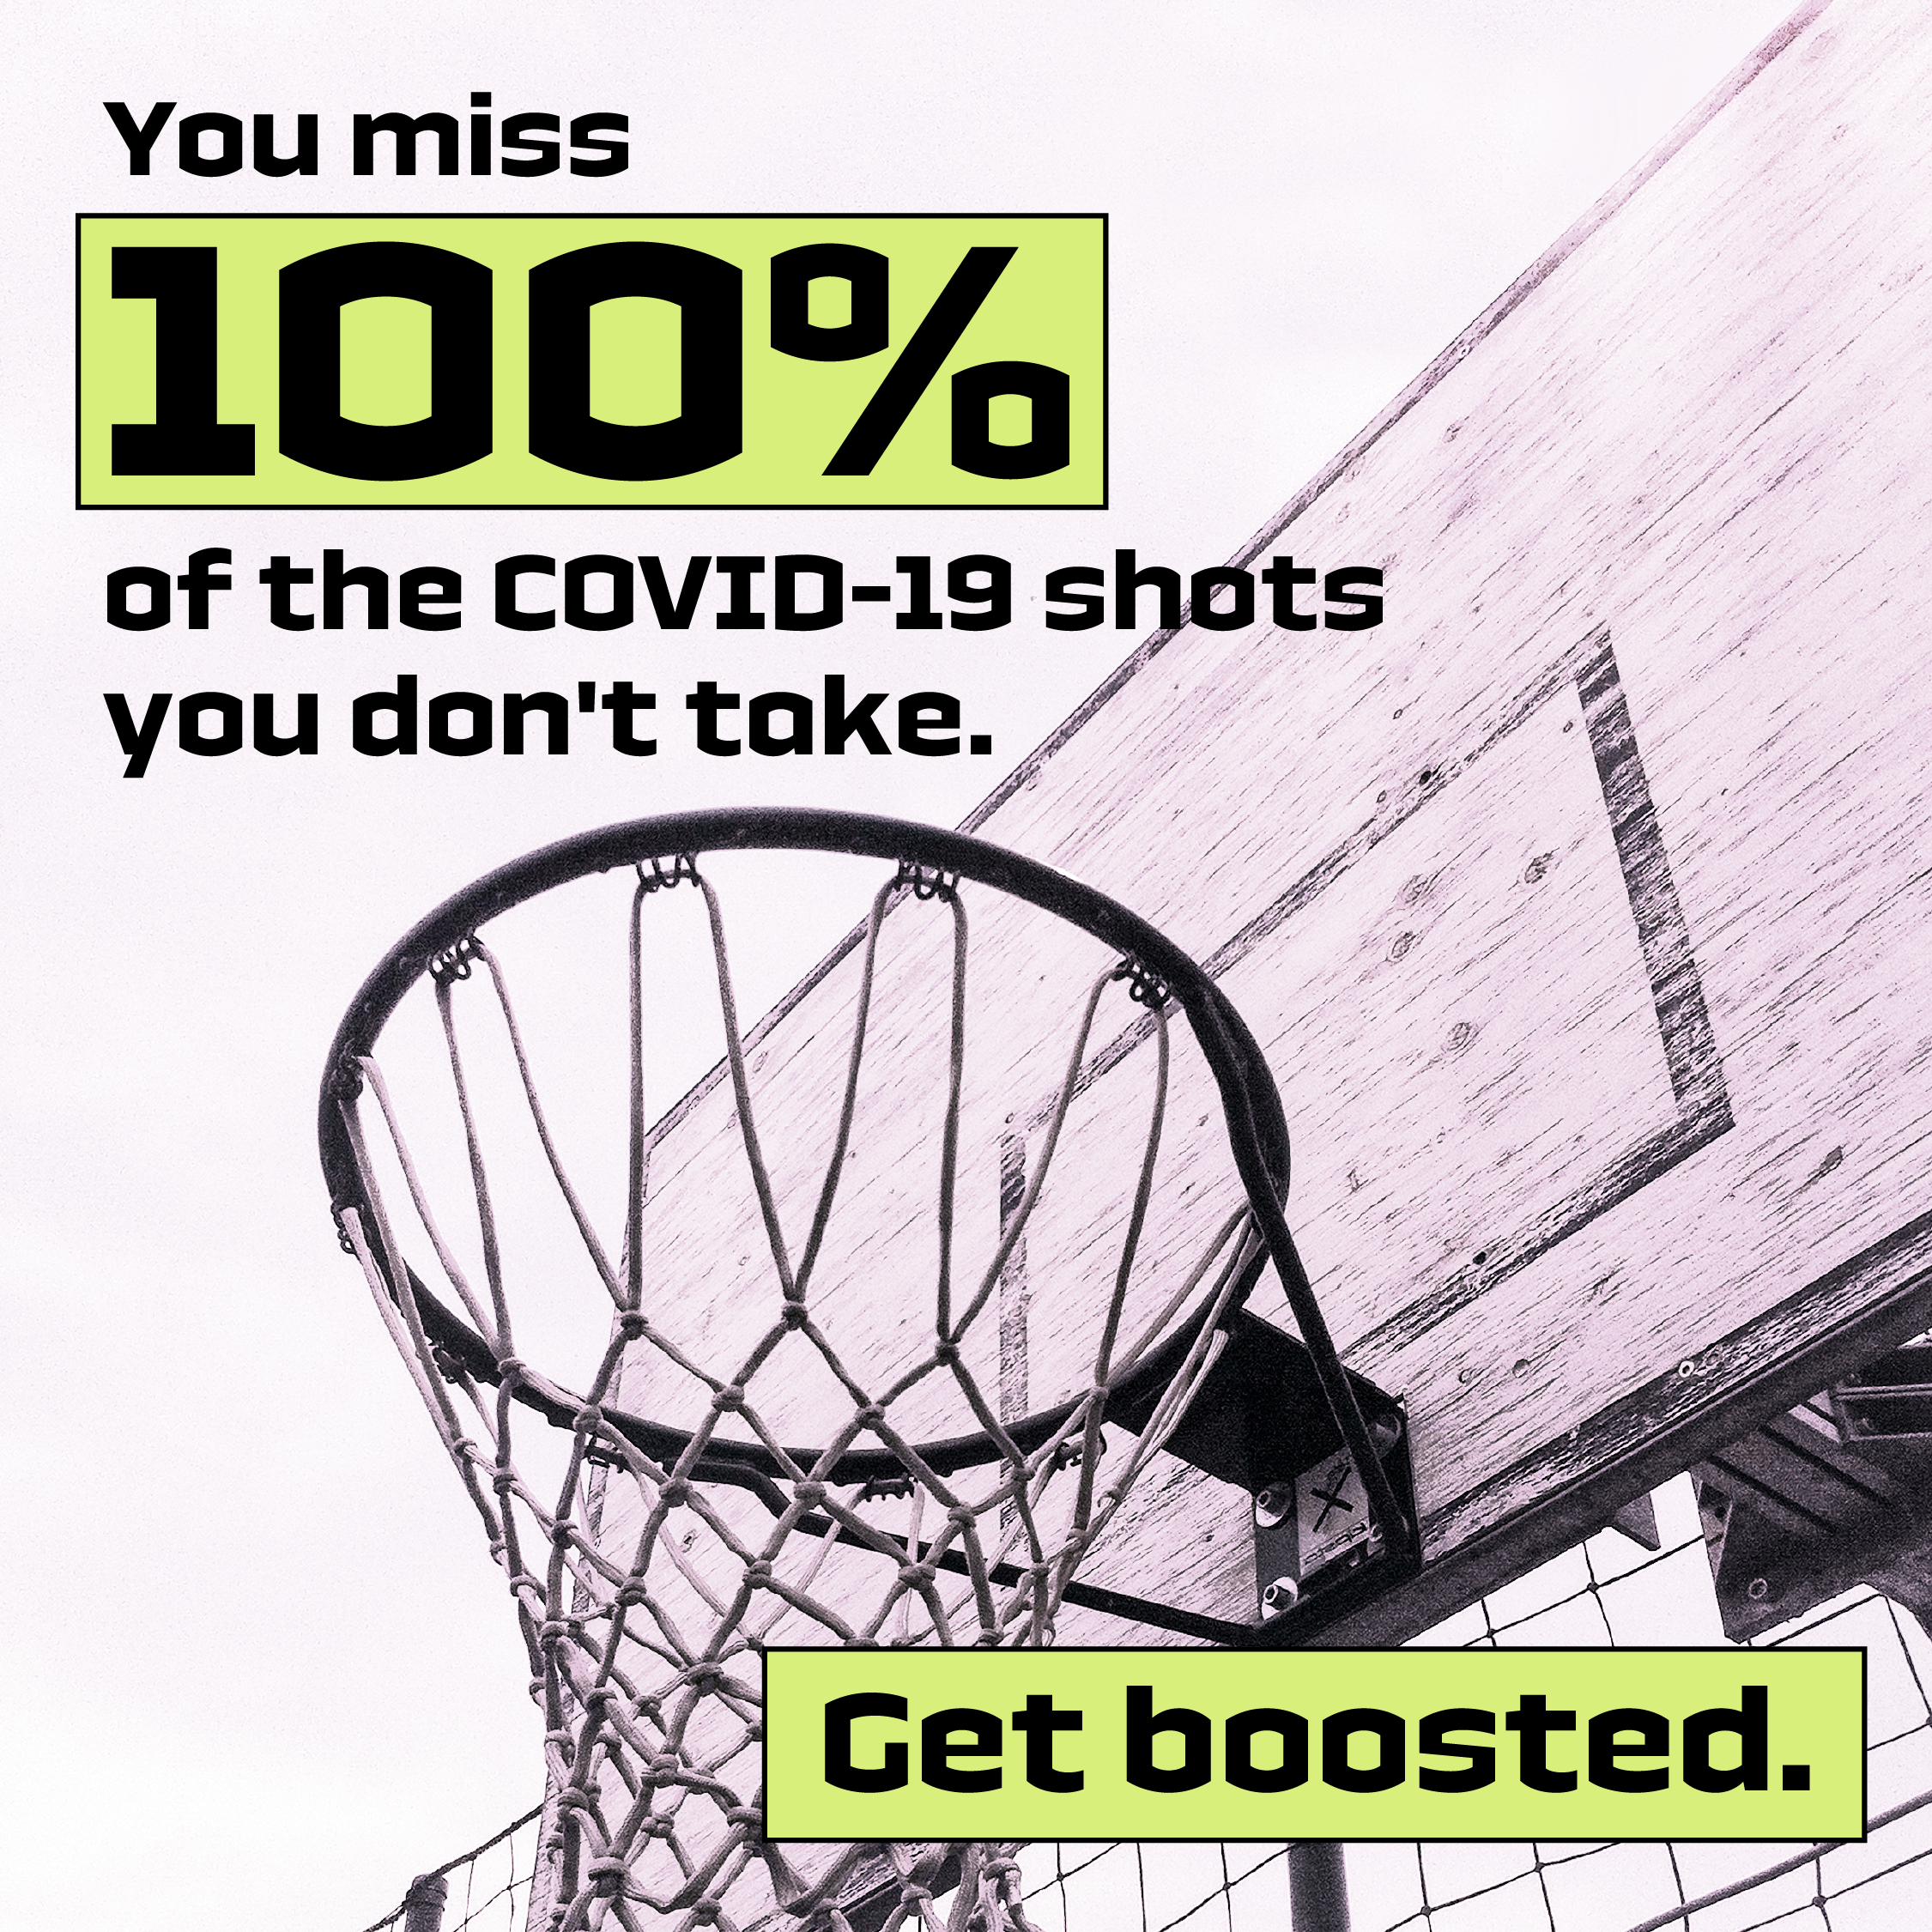 Graphic notes that you miss 100% of the COVID-19 shots you don't take and says get boosted. It shows a basketball hoop.